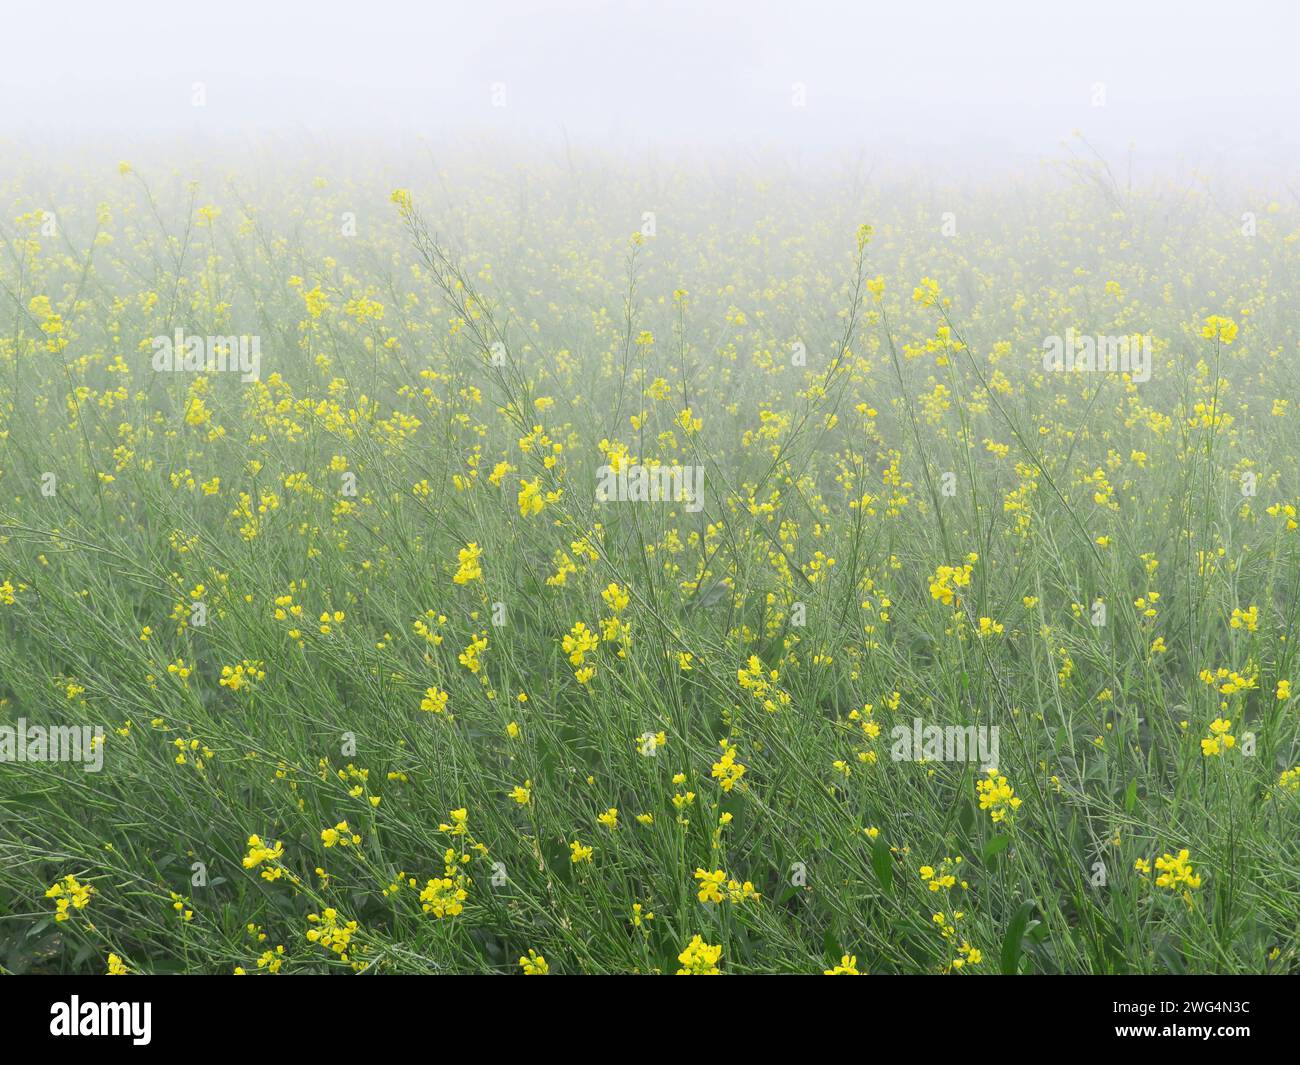 A different image of a field of mustard flowers or plants on a foggy misty day. A winter crop of mustard with fog background. Stock Photo